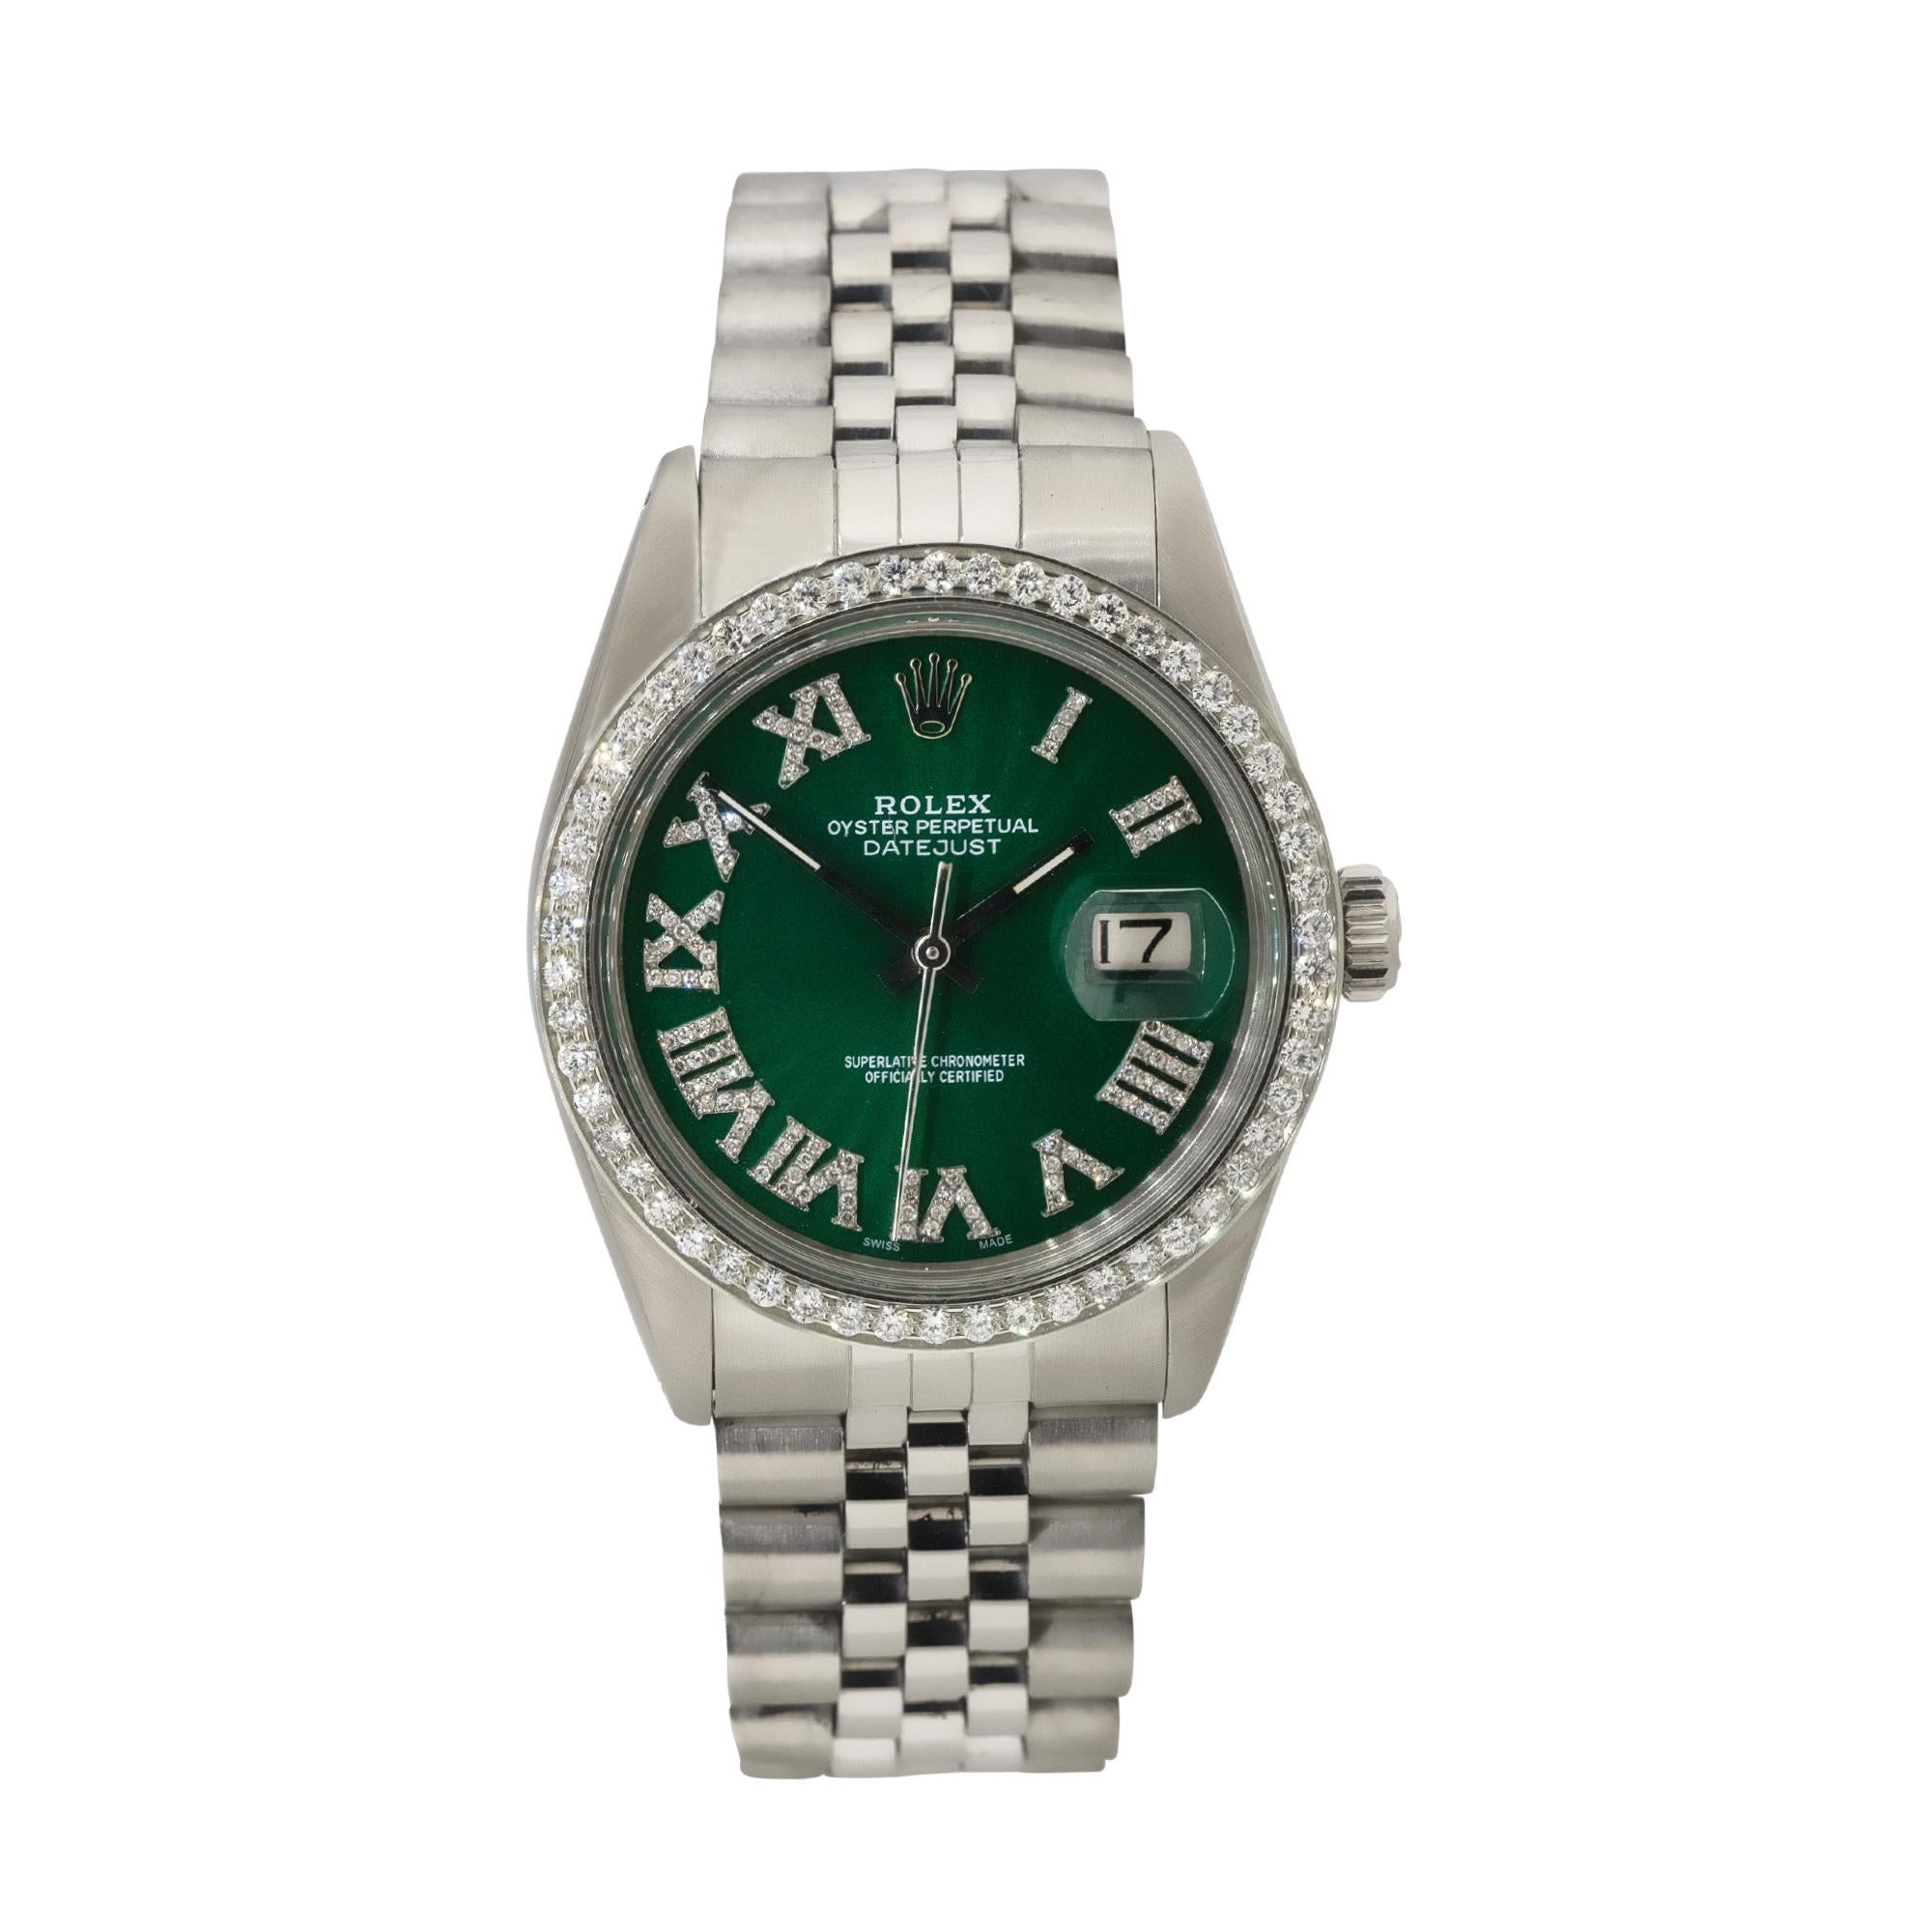 Rolex 16014 Datejust 36mm Stainless Steel Green Diamond Dial Watch
The Rolex 16014 Datejust with a green diamond dial offers a bold and unique design that appeals to individuals looking for a distinctive and stylish timepiece. The combination of